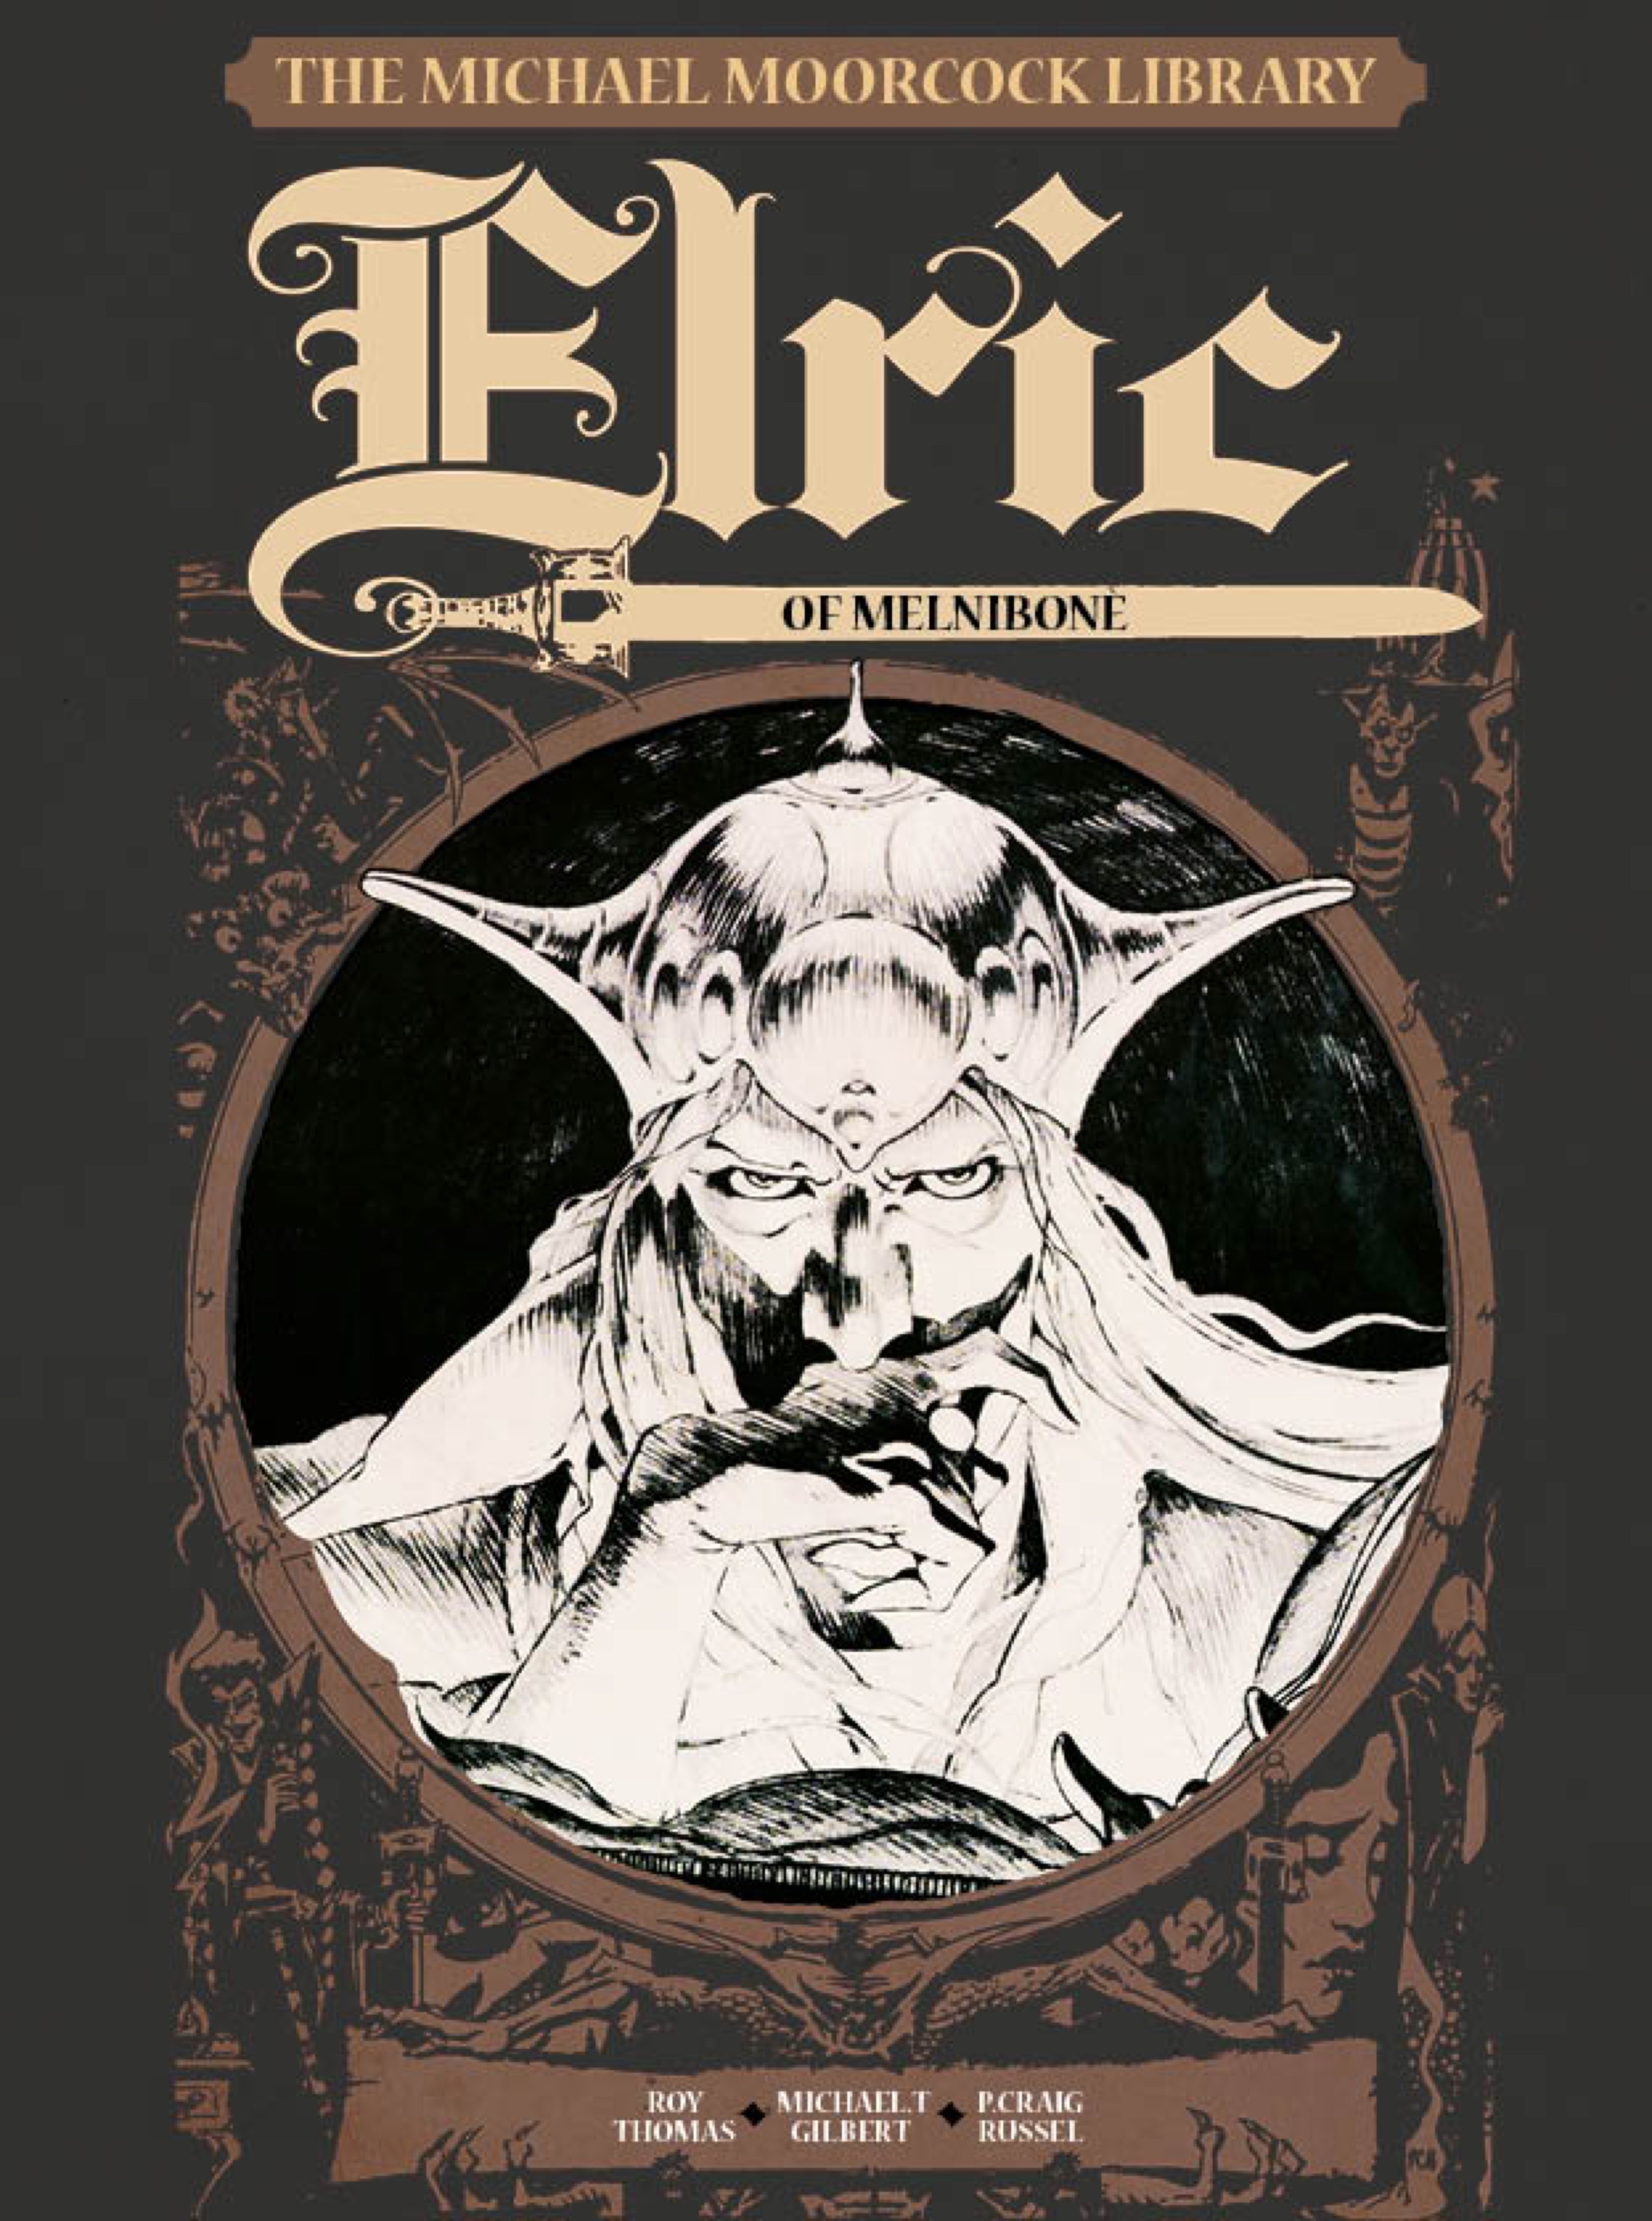 Moorcock Library Hardcover Graphic Novel Volume 1 Elric of Melnibone 